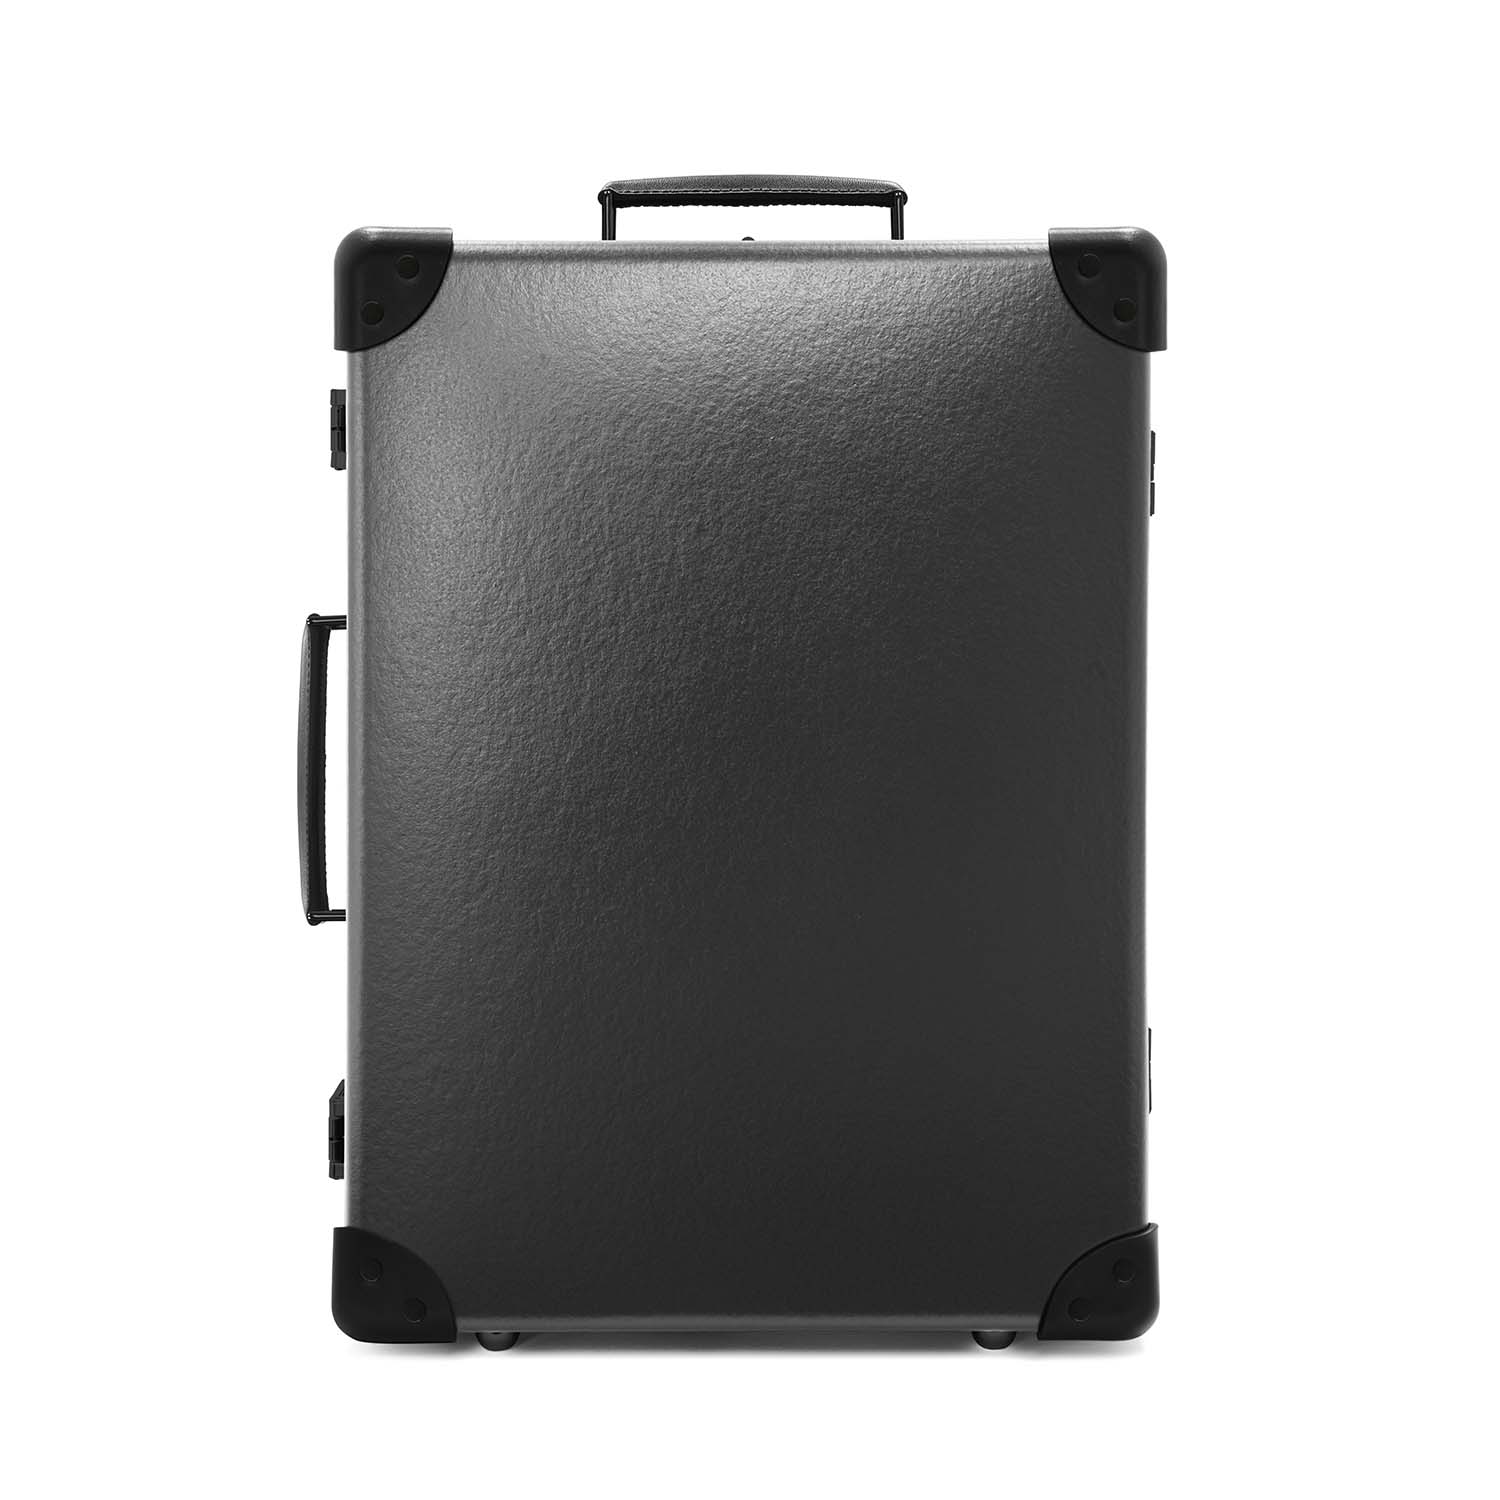 Centenary · Small Carry-On - 2 Wheels | Charcoal/Black/Black